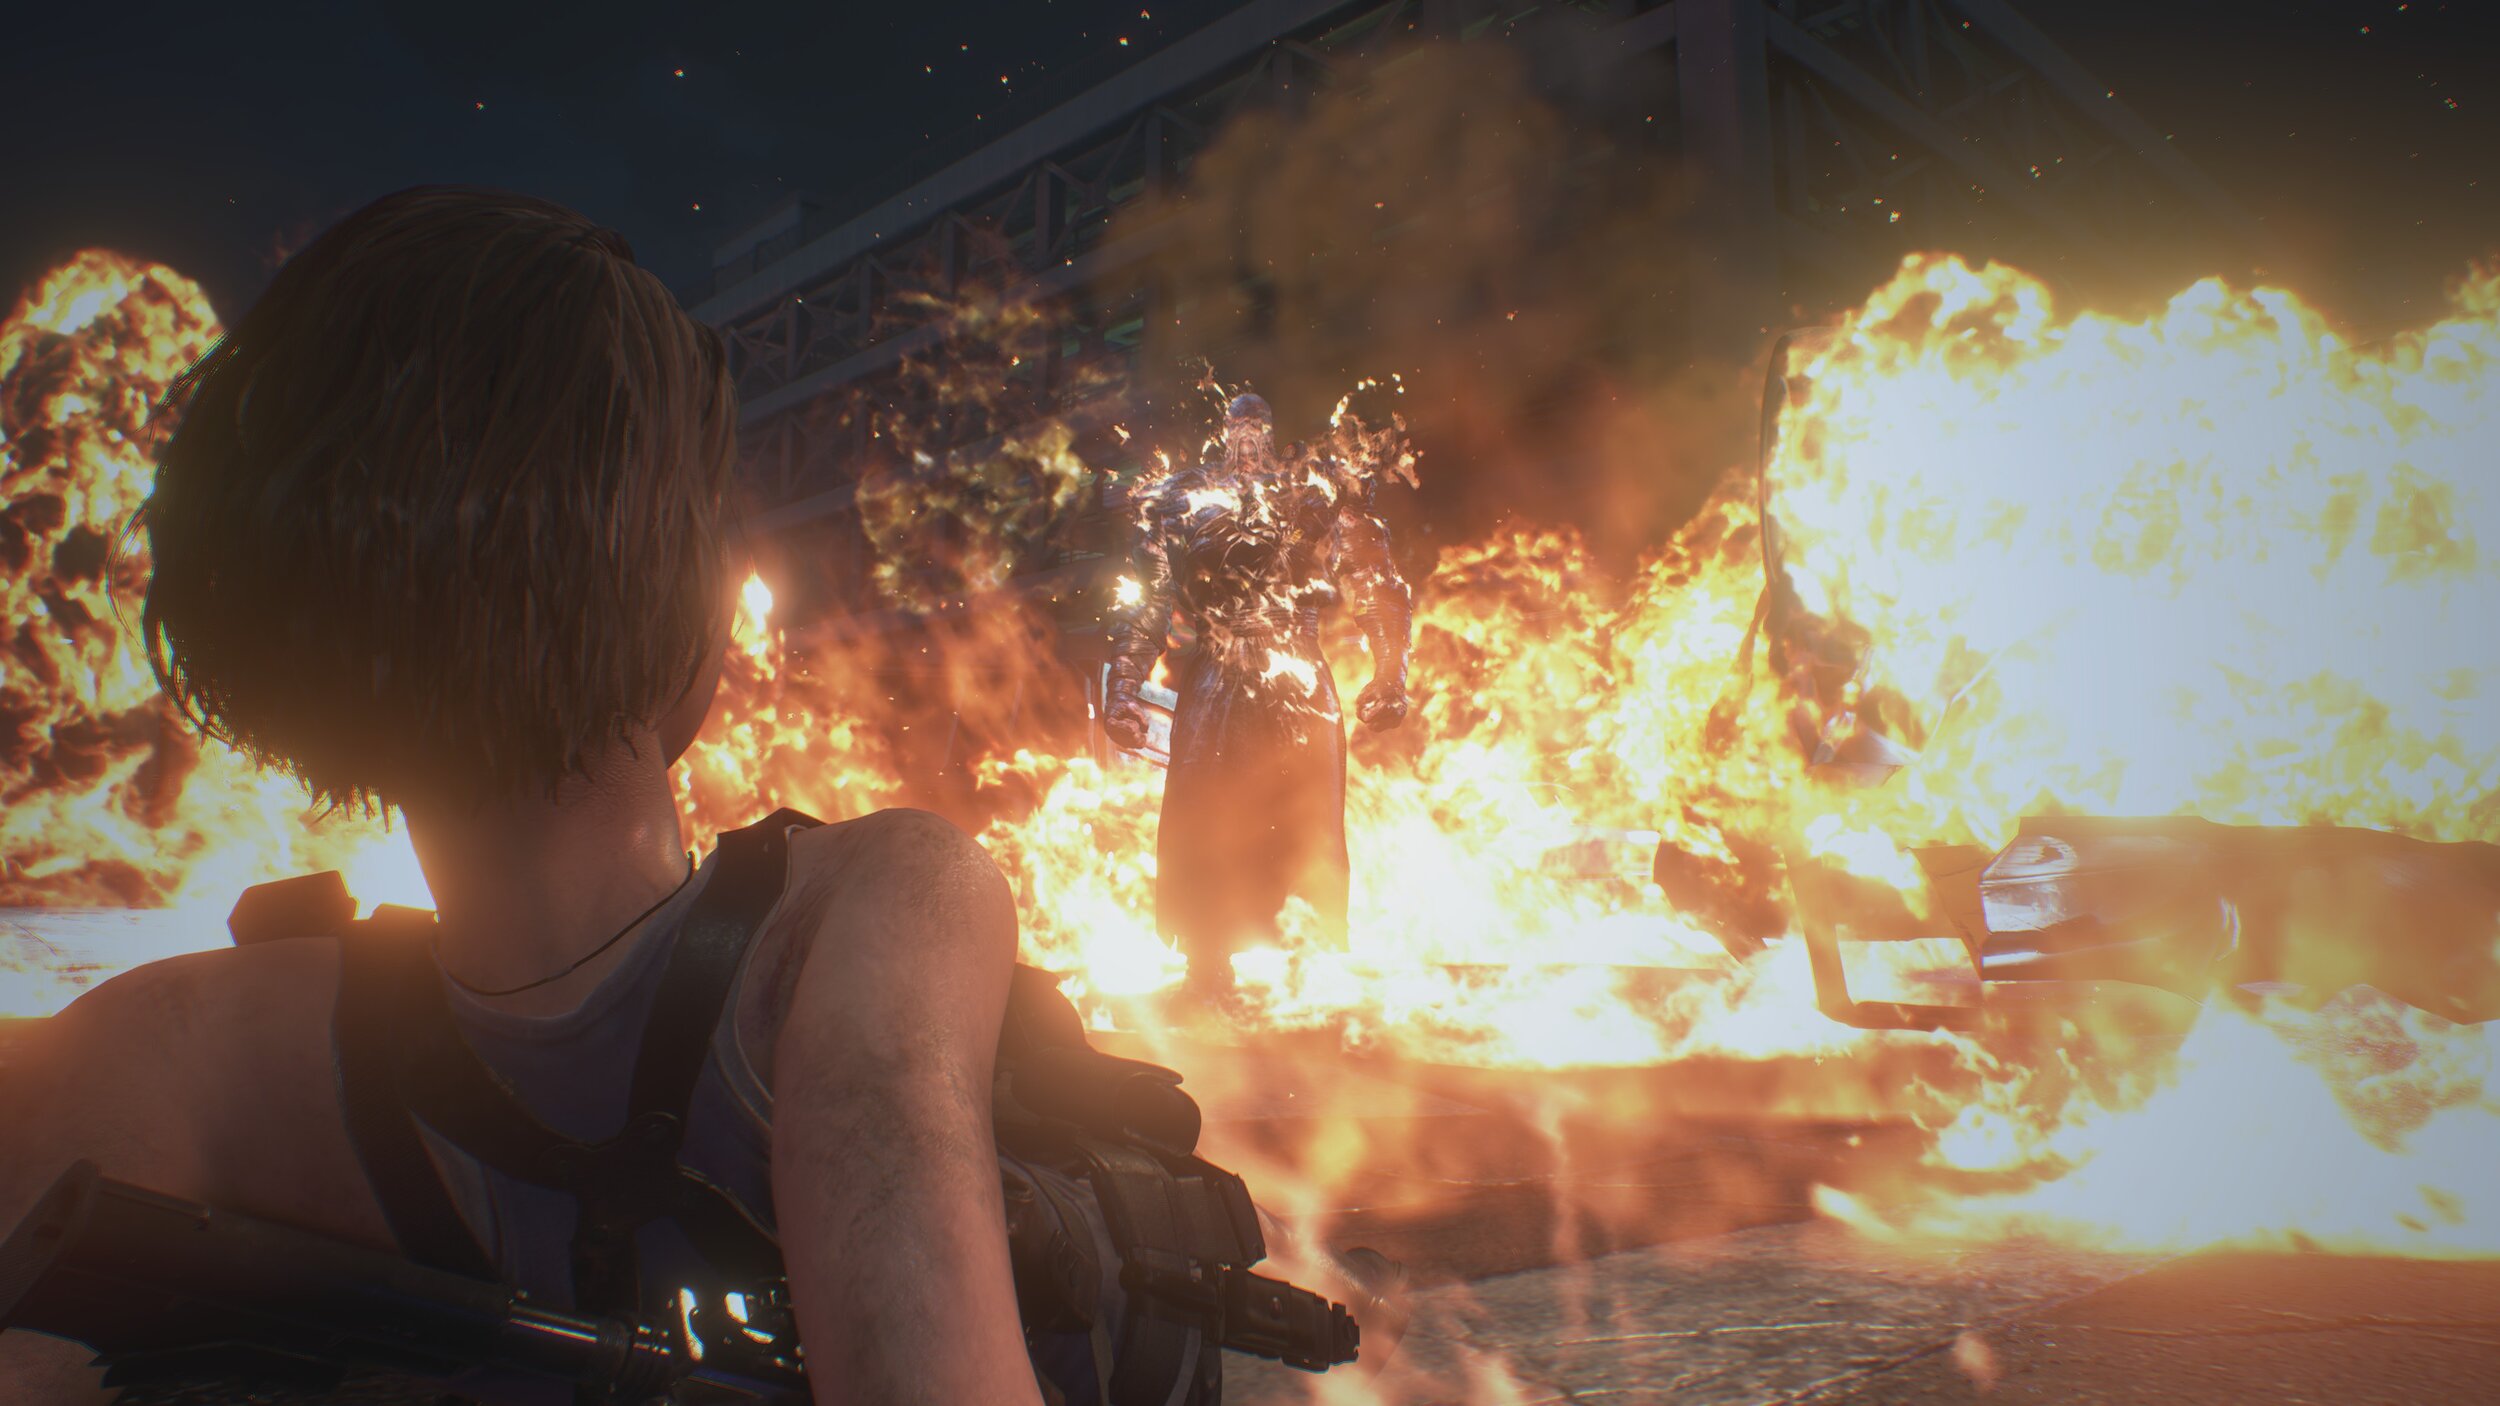 Resident Evil 3 could be one of the last disaster games ever made